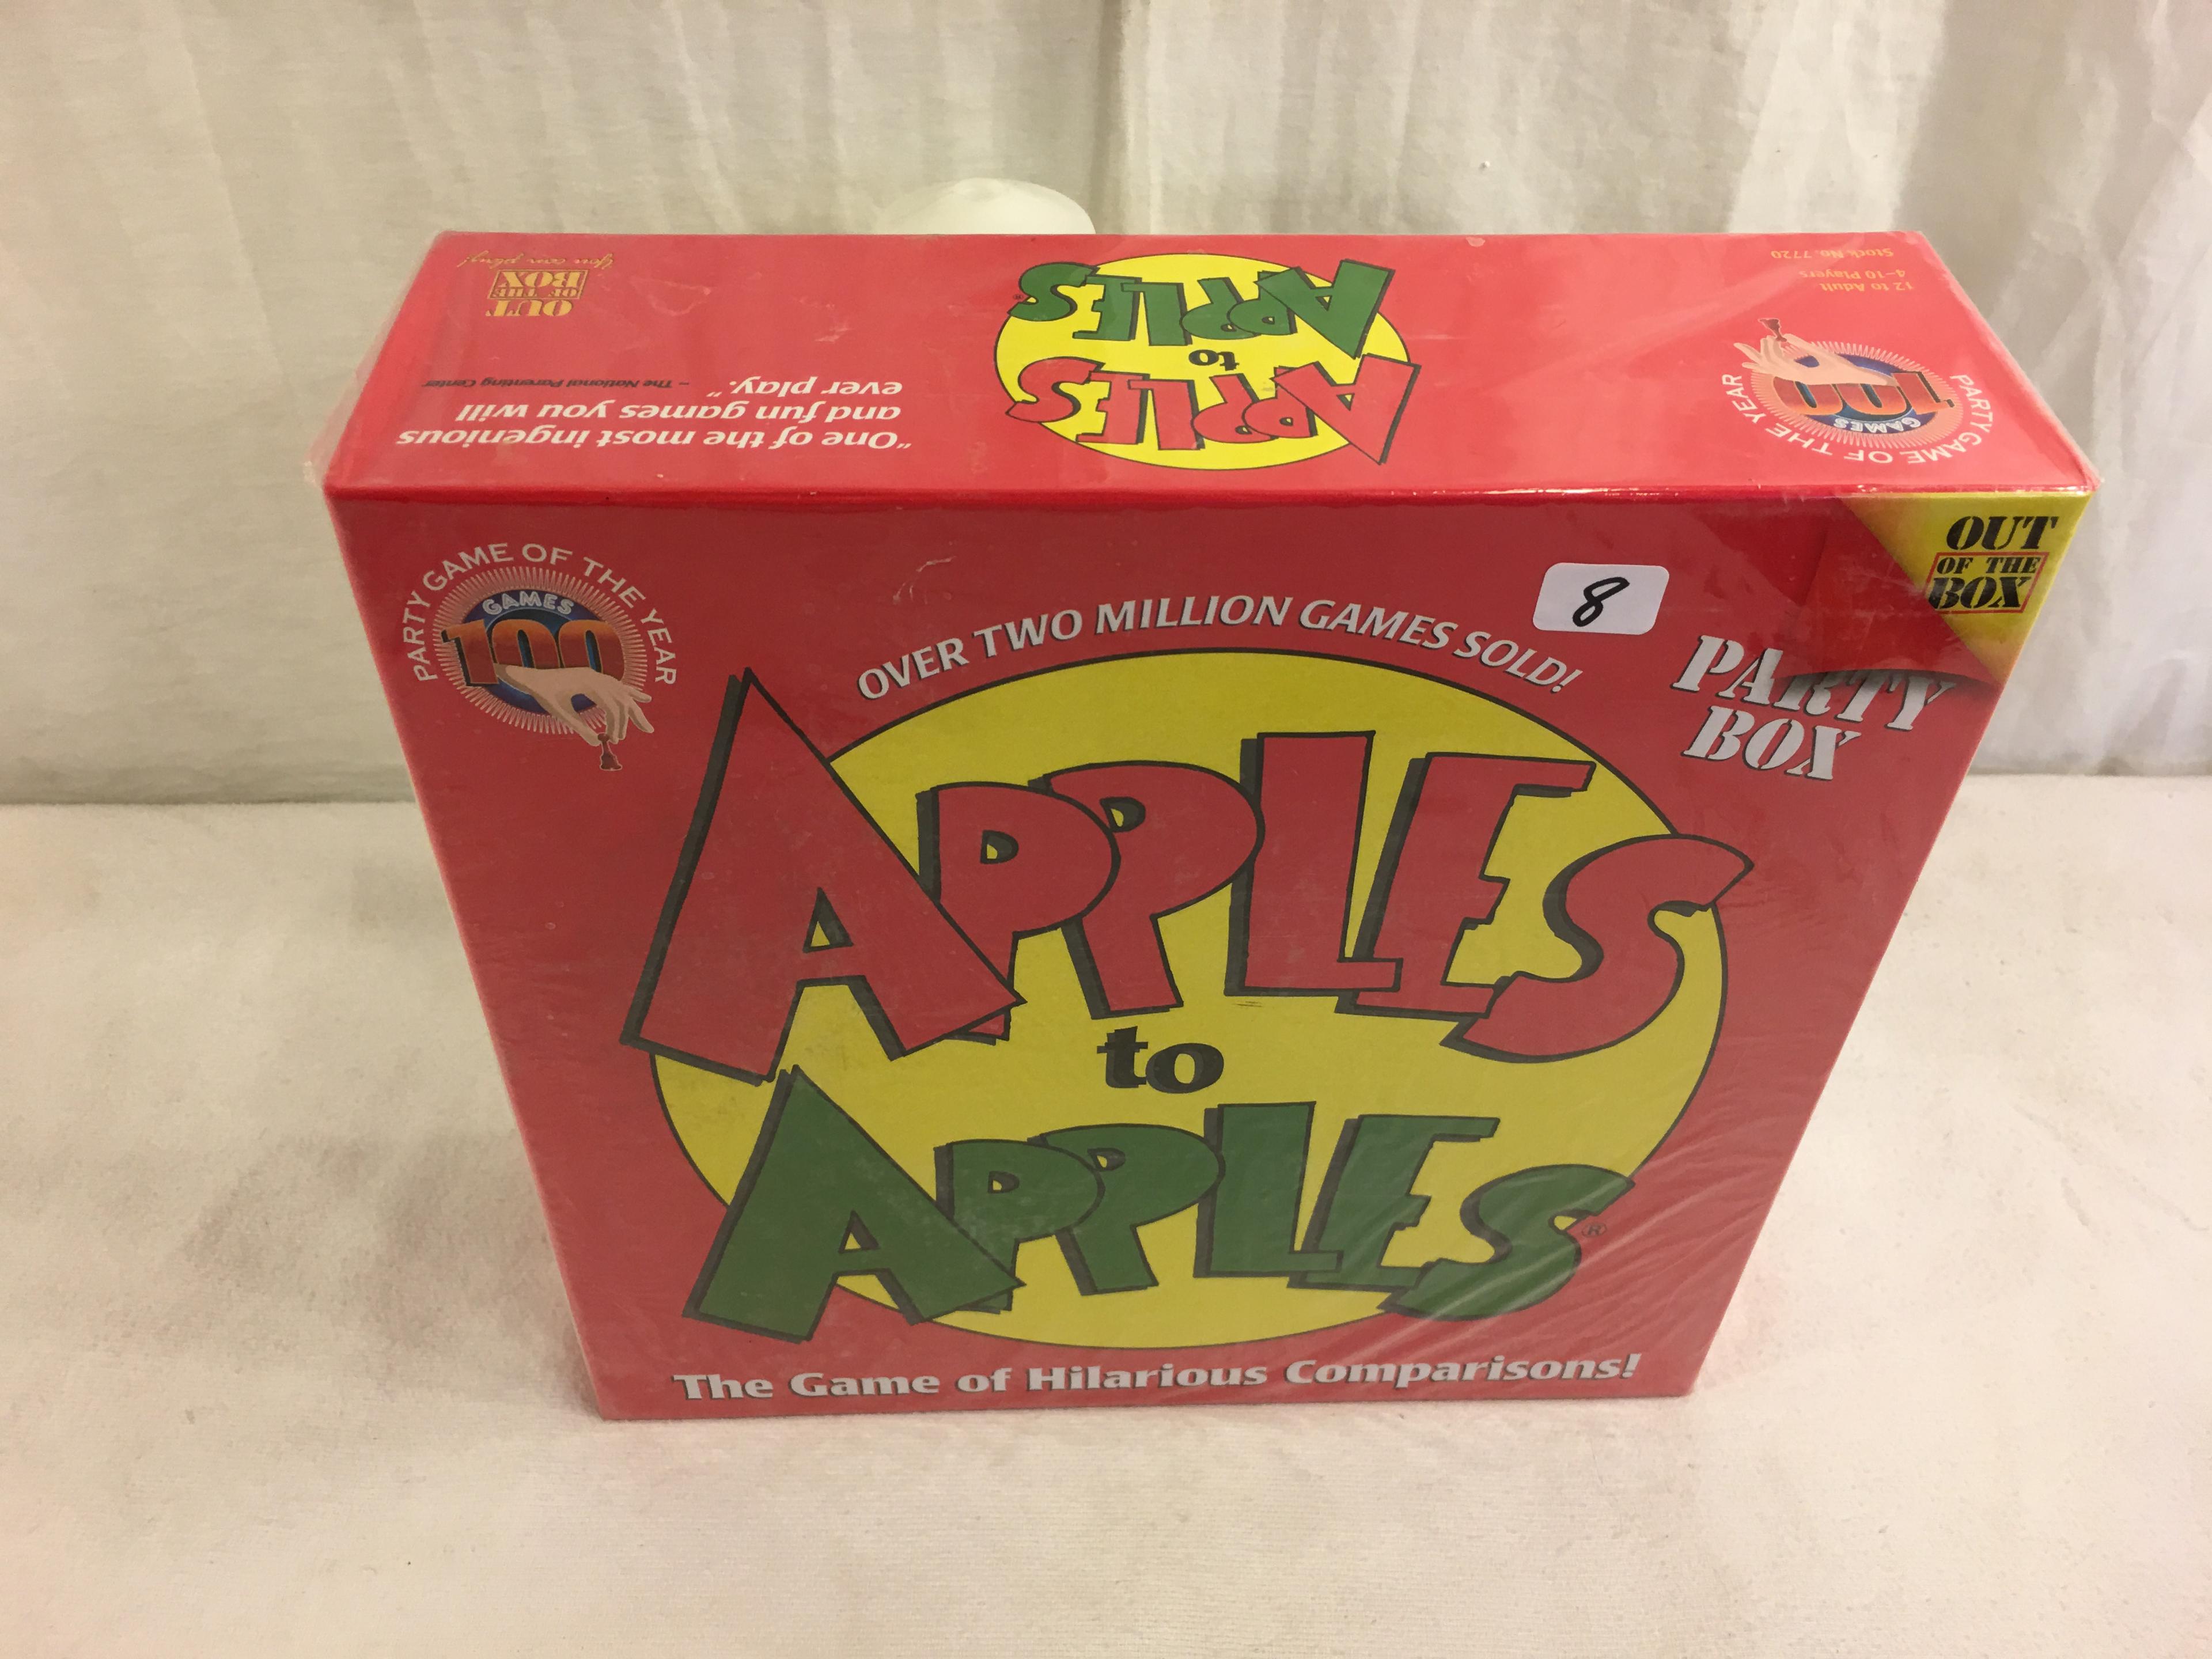 New Sealed in Box Party Box Apples TO Apples The Game Of Hilarious Comparisons Box Size:10x10" Box